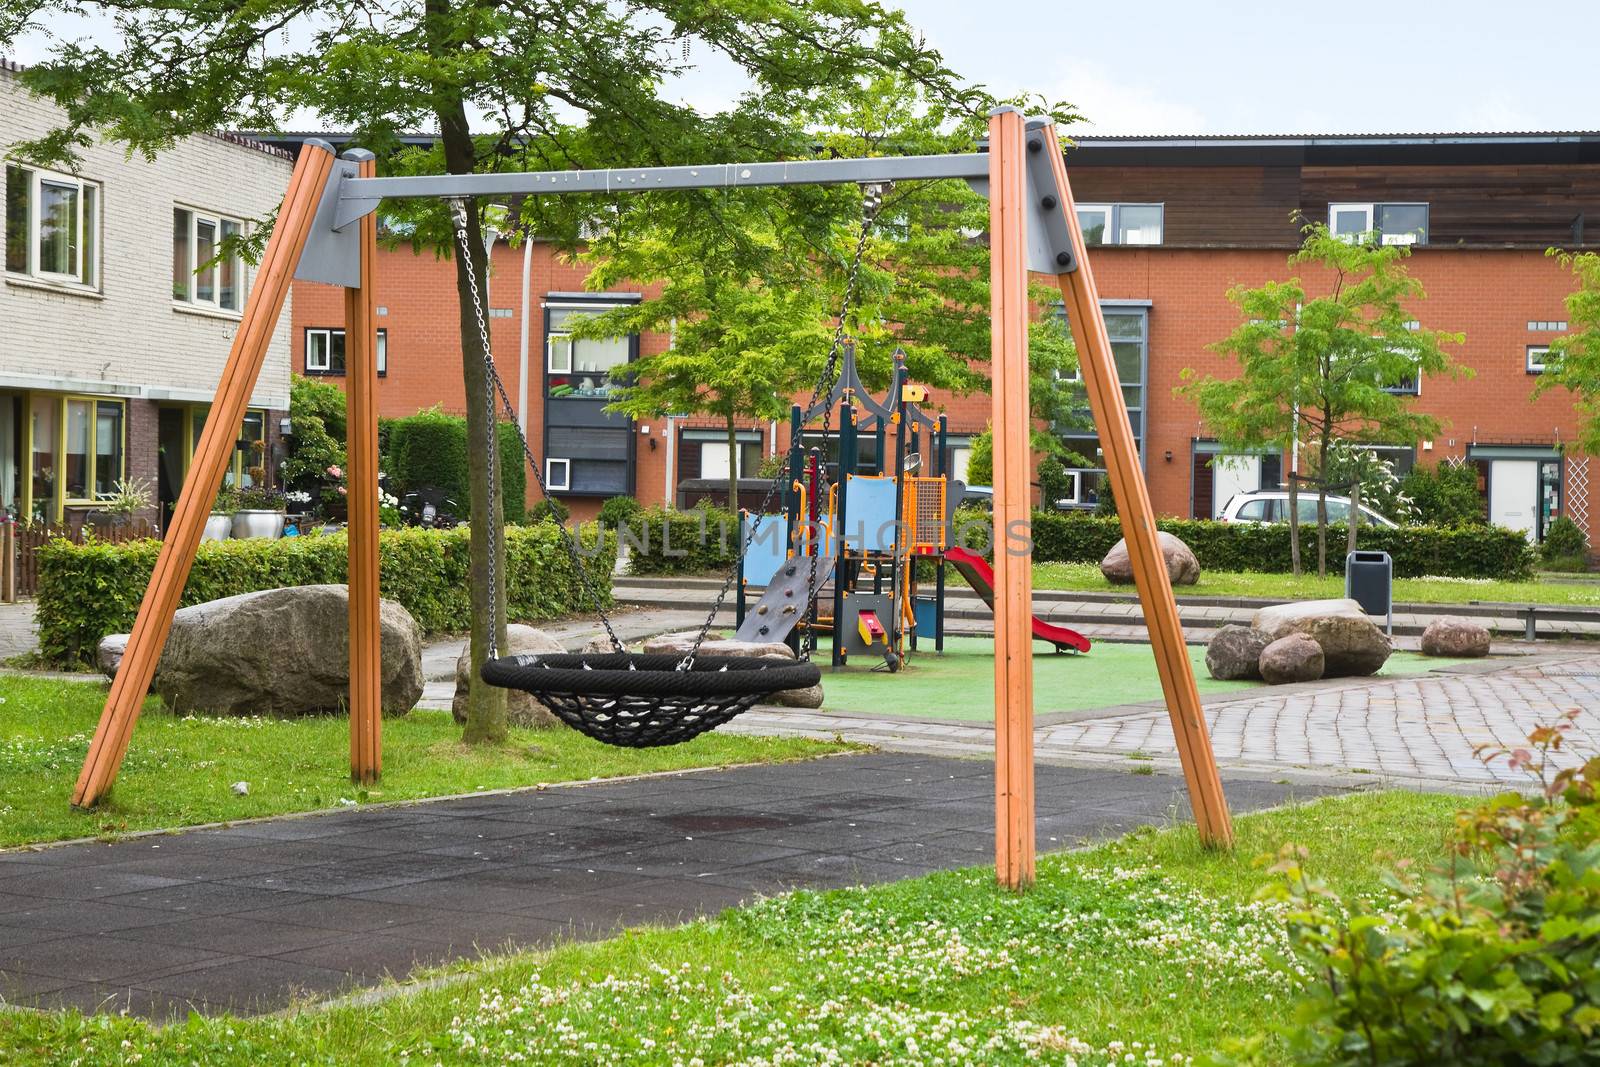 Public playground in modern suburb with colorful wooden climbing construction, swing, slides and rubber floor for safe playing